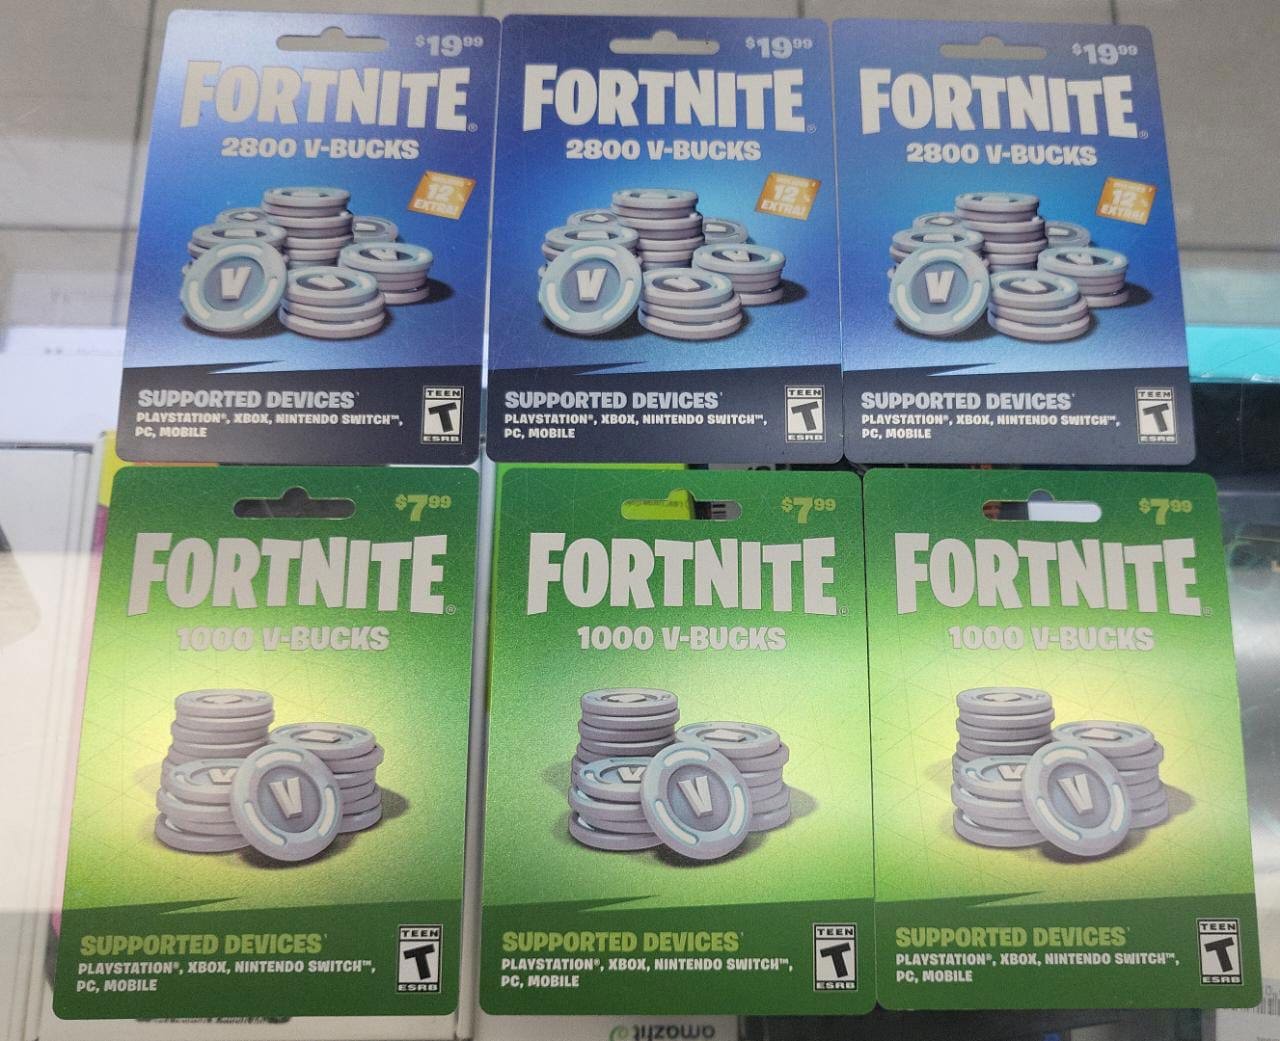 FORTNITE GIFT CARDS AVAILABLE 7.99 & 19.99 - ecay